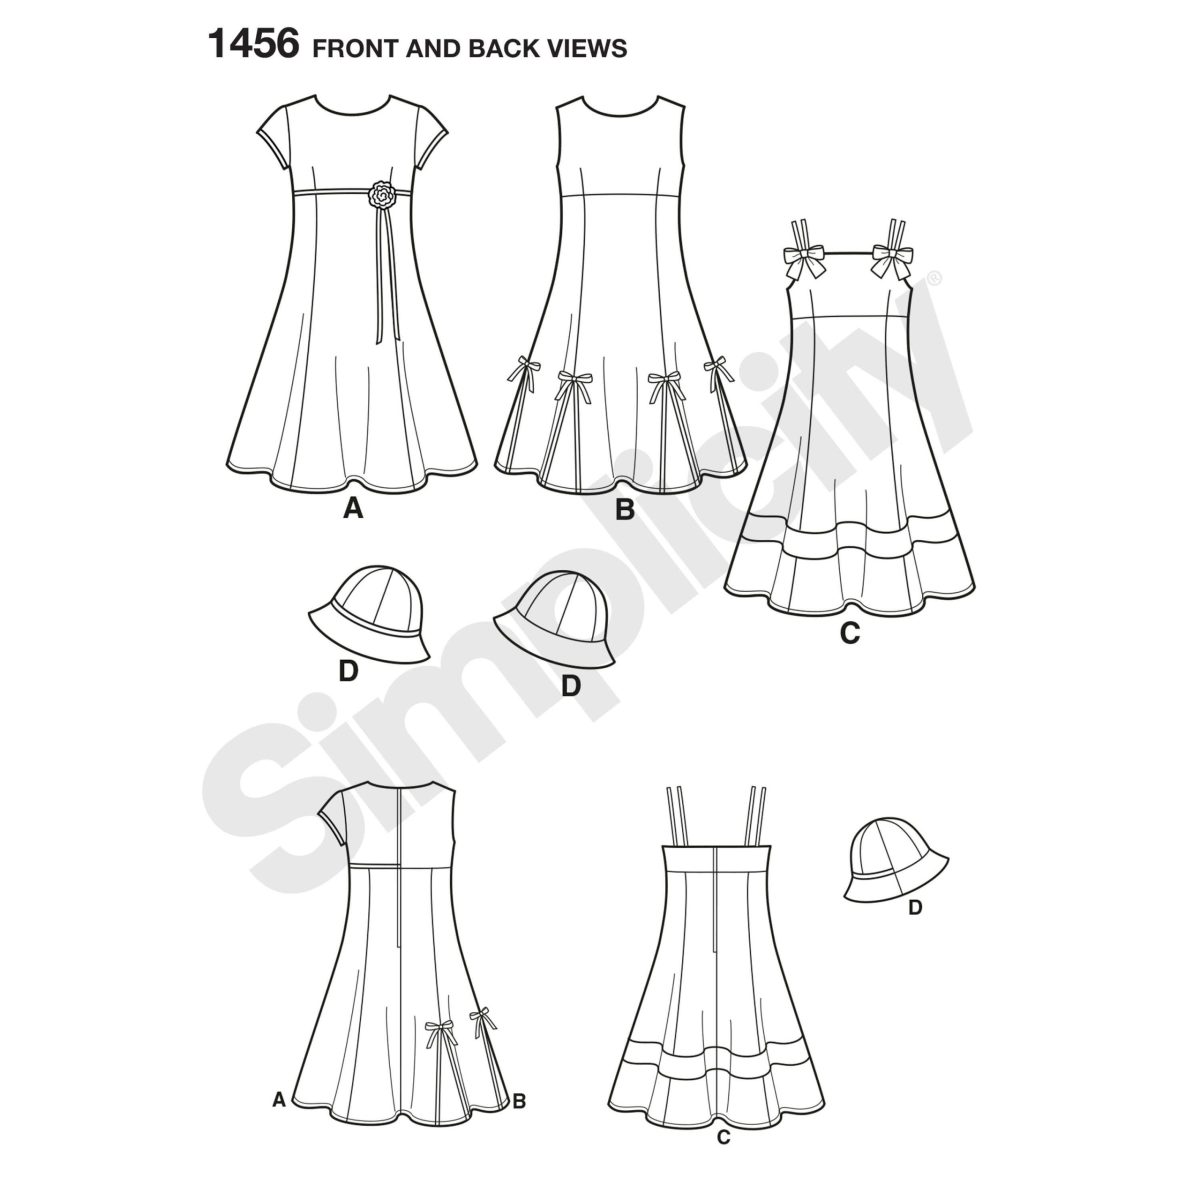 Simplicity Sewing Pattern 1456 Child's and Girls' Dress with Bodice Variations and Hat